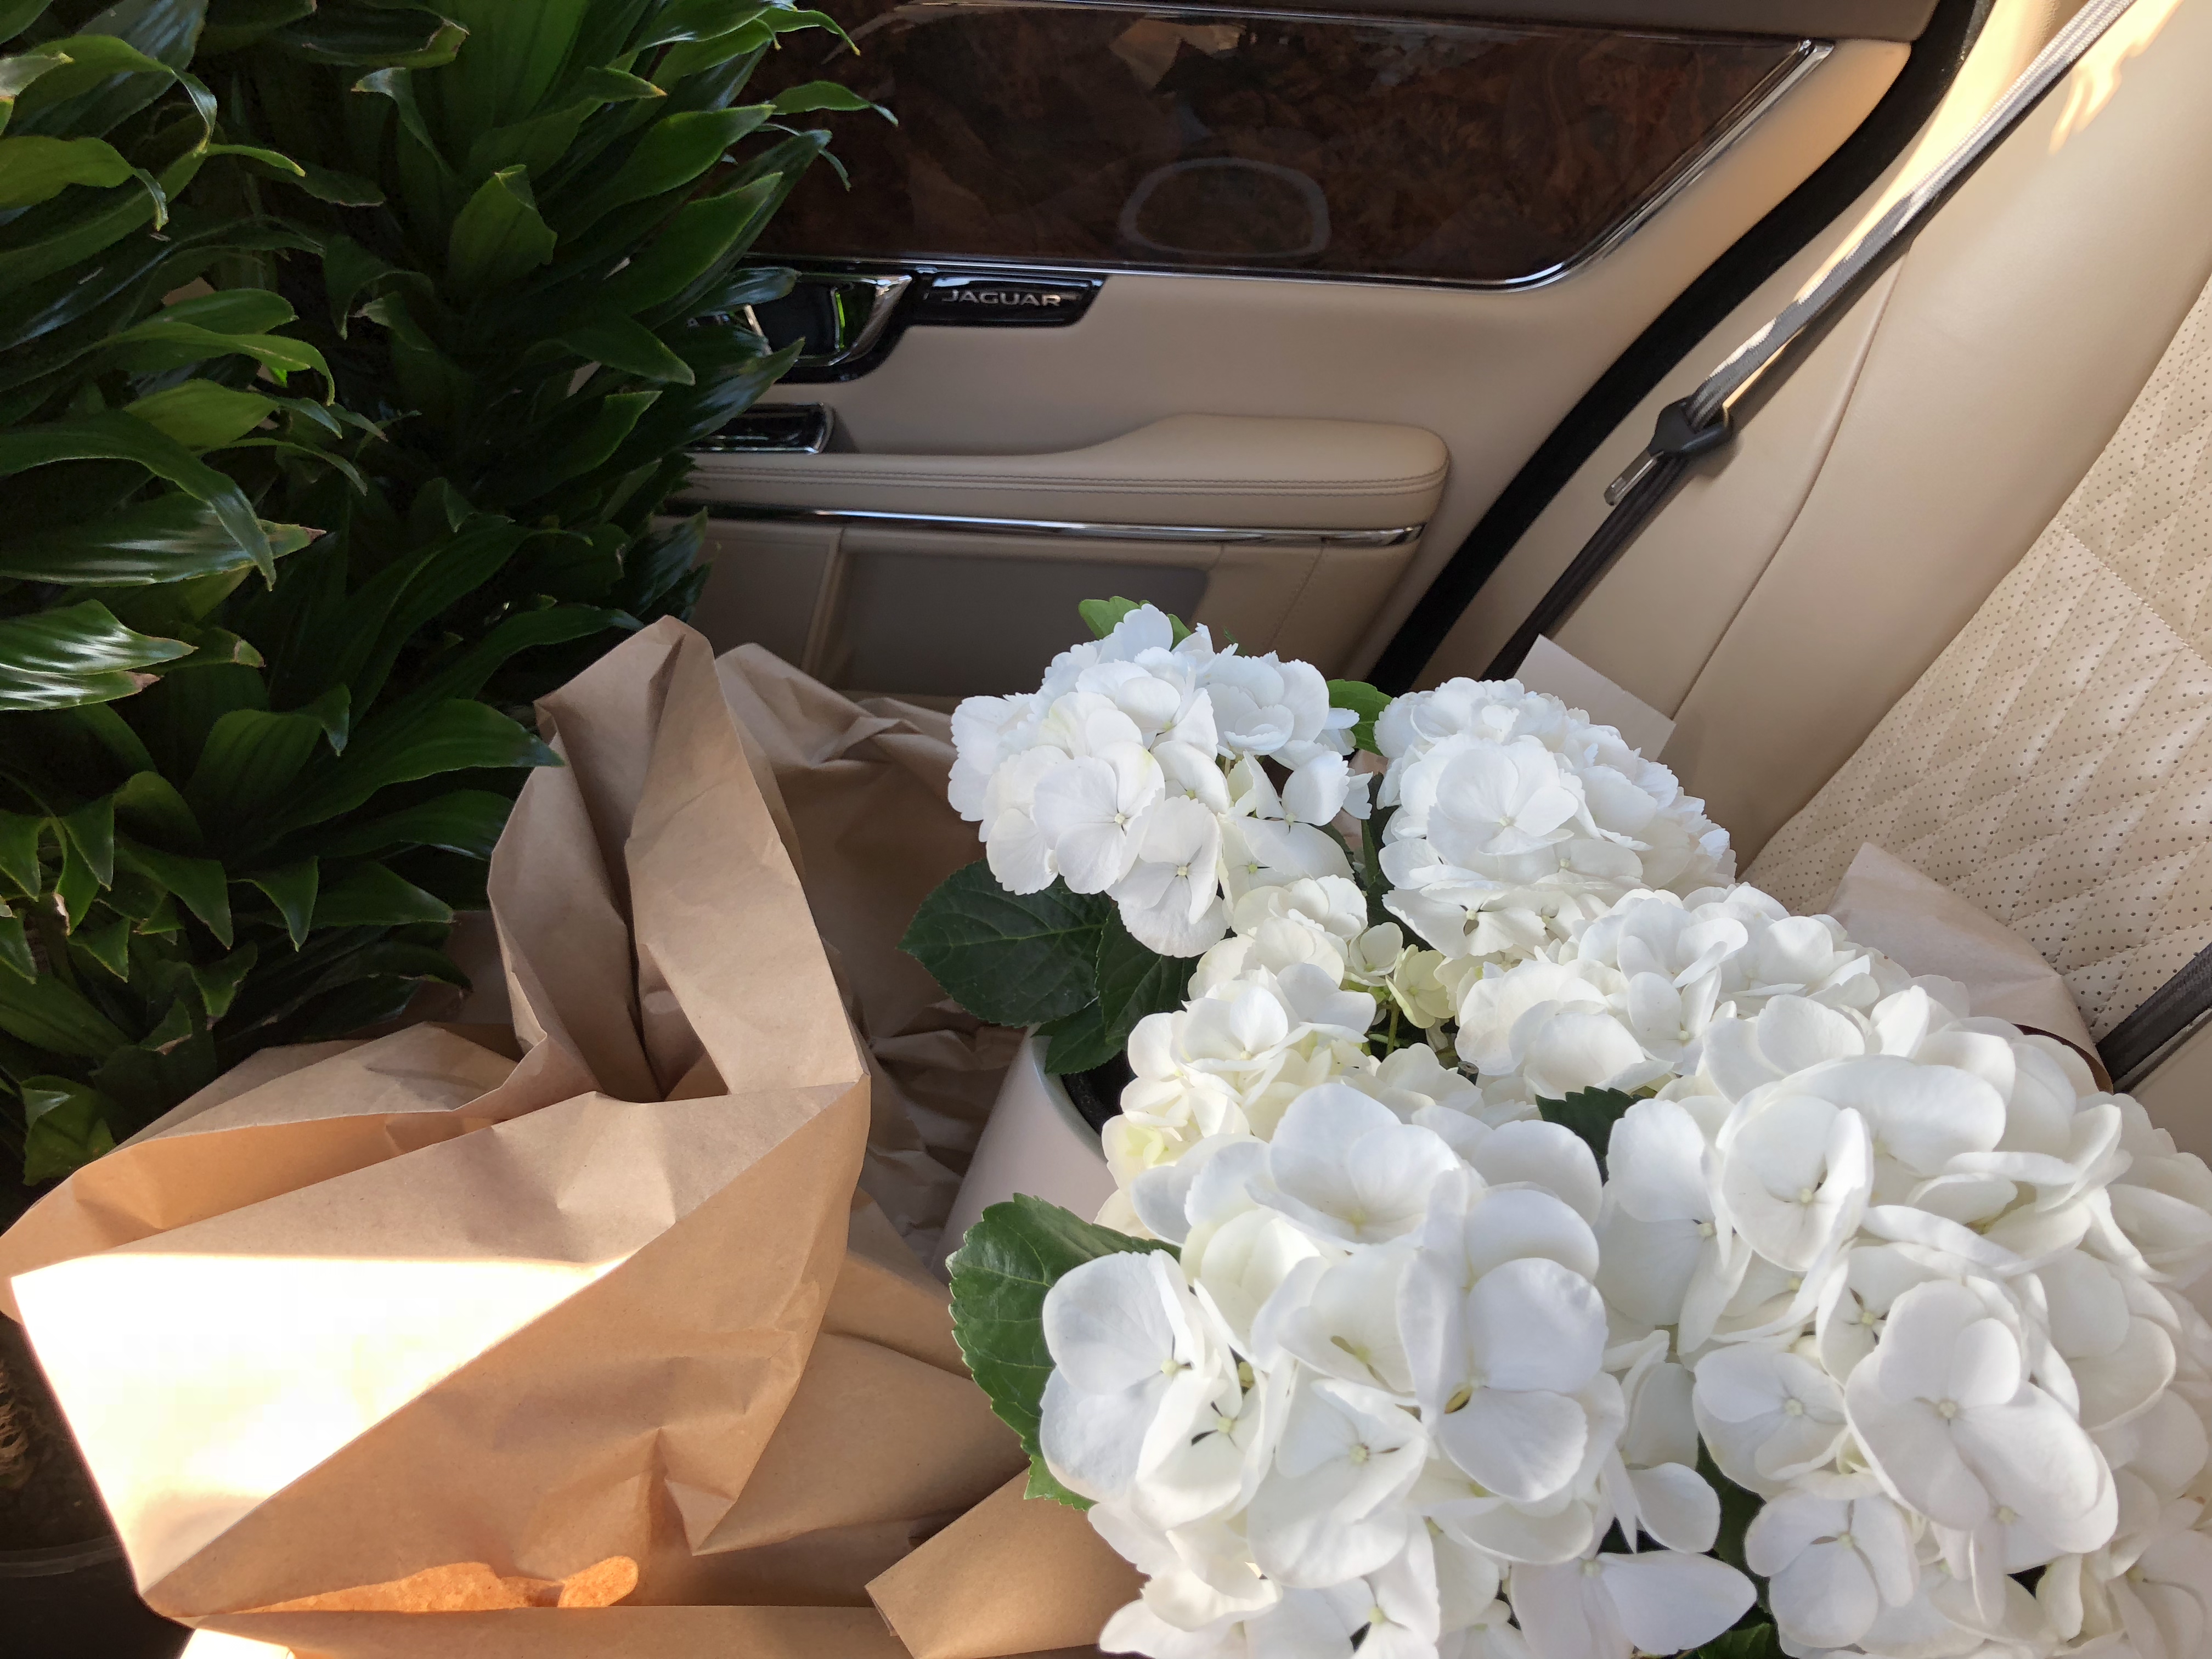 Roger's Gardens Newport Beach - Joshua and Aaron Taking Home Some White Hydrangea for the Patios